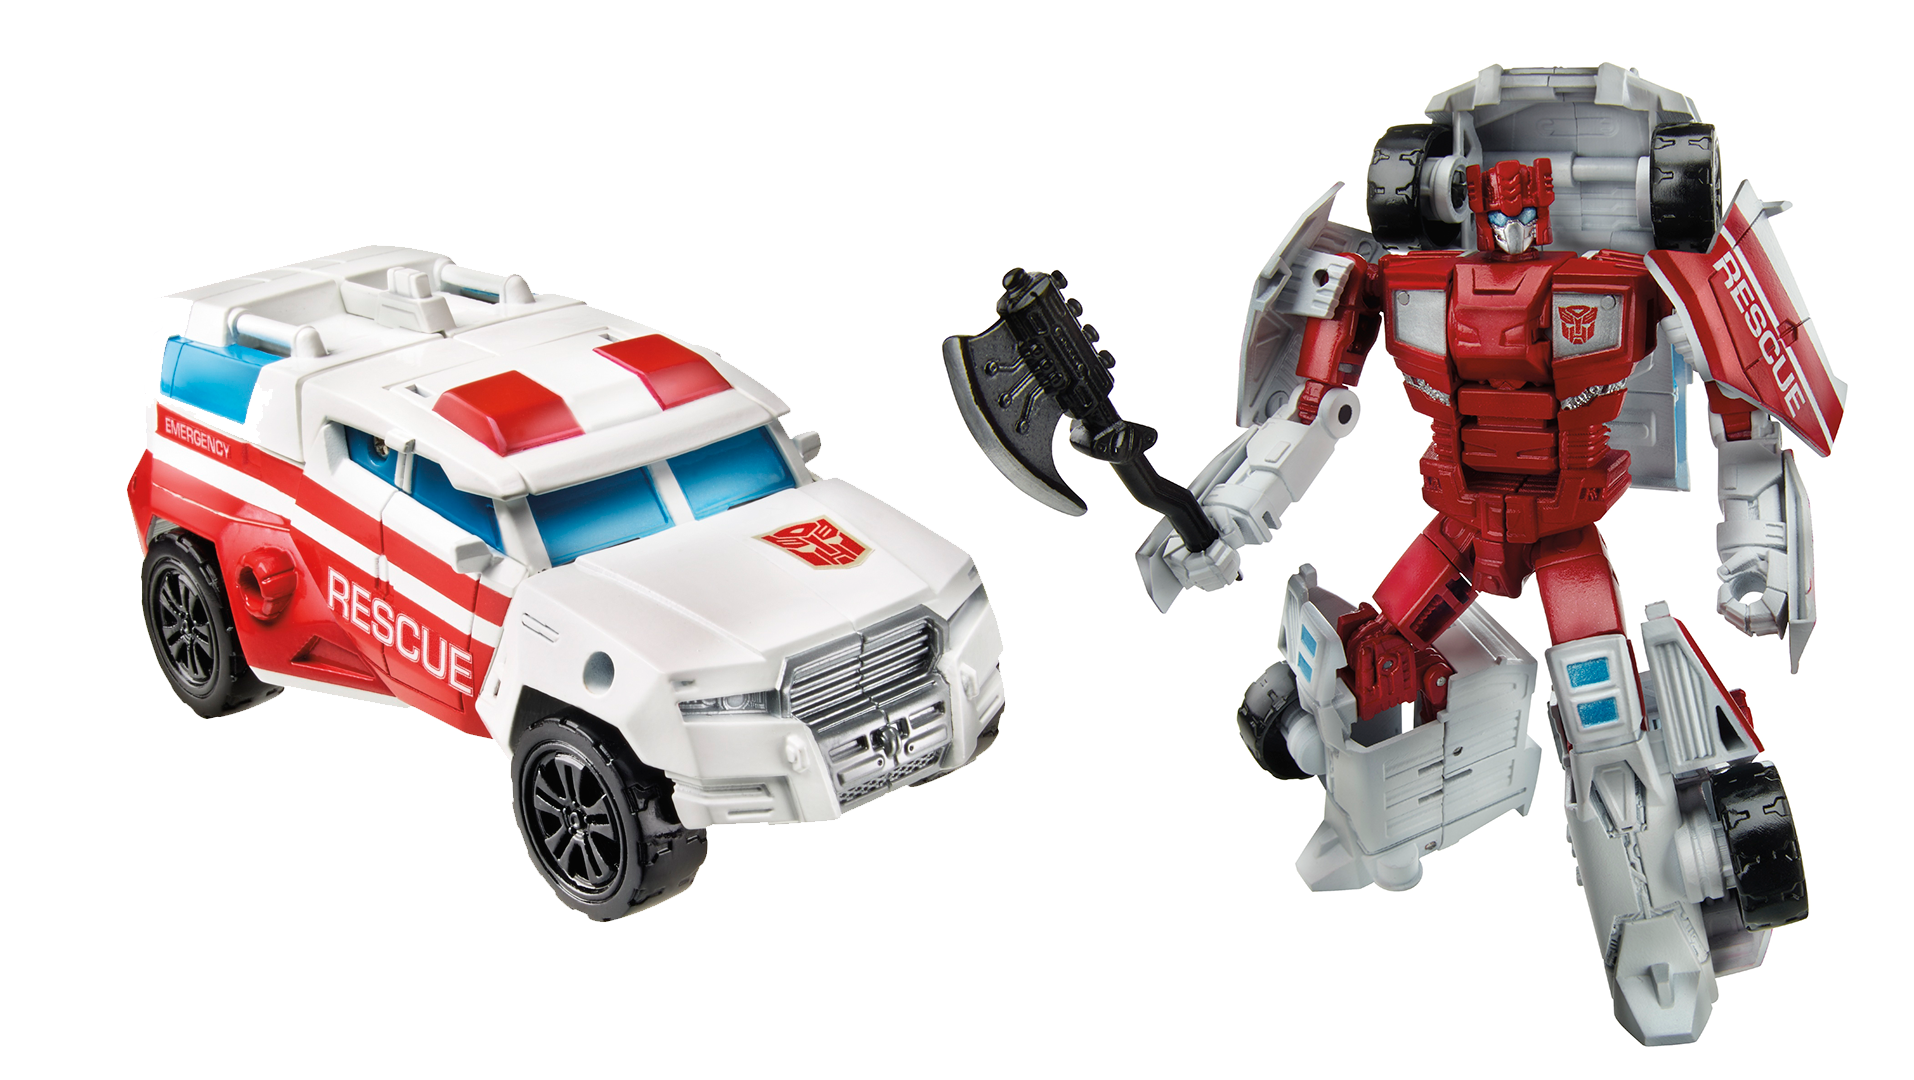 Transformer’s Most Fearsome Combiner Team Finally Gets Its Due